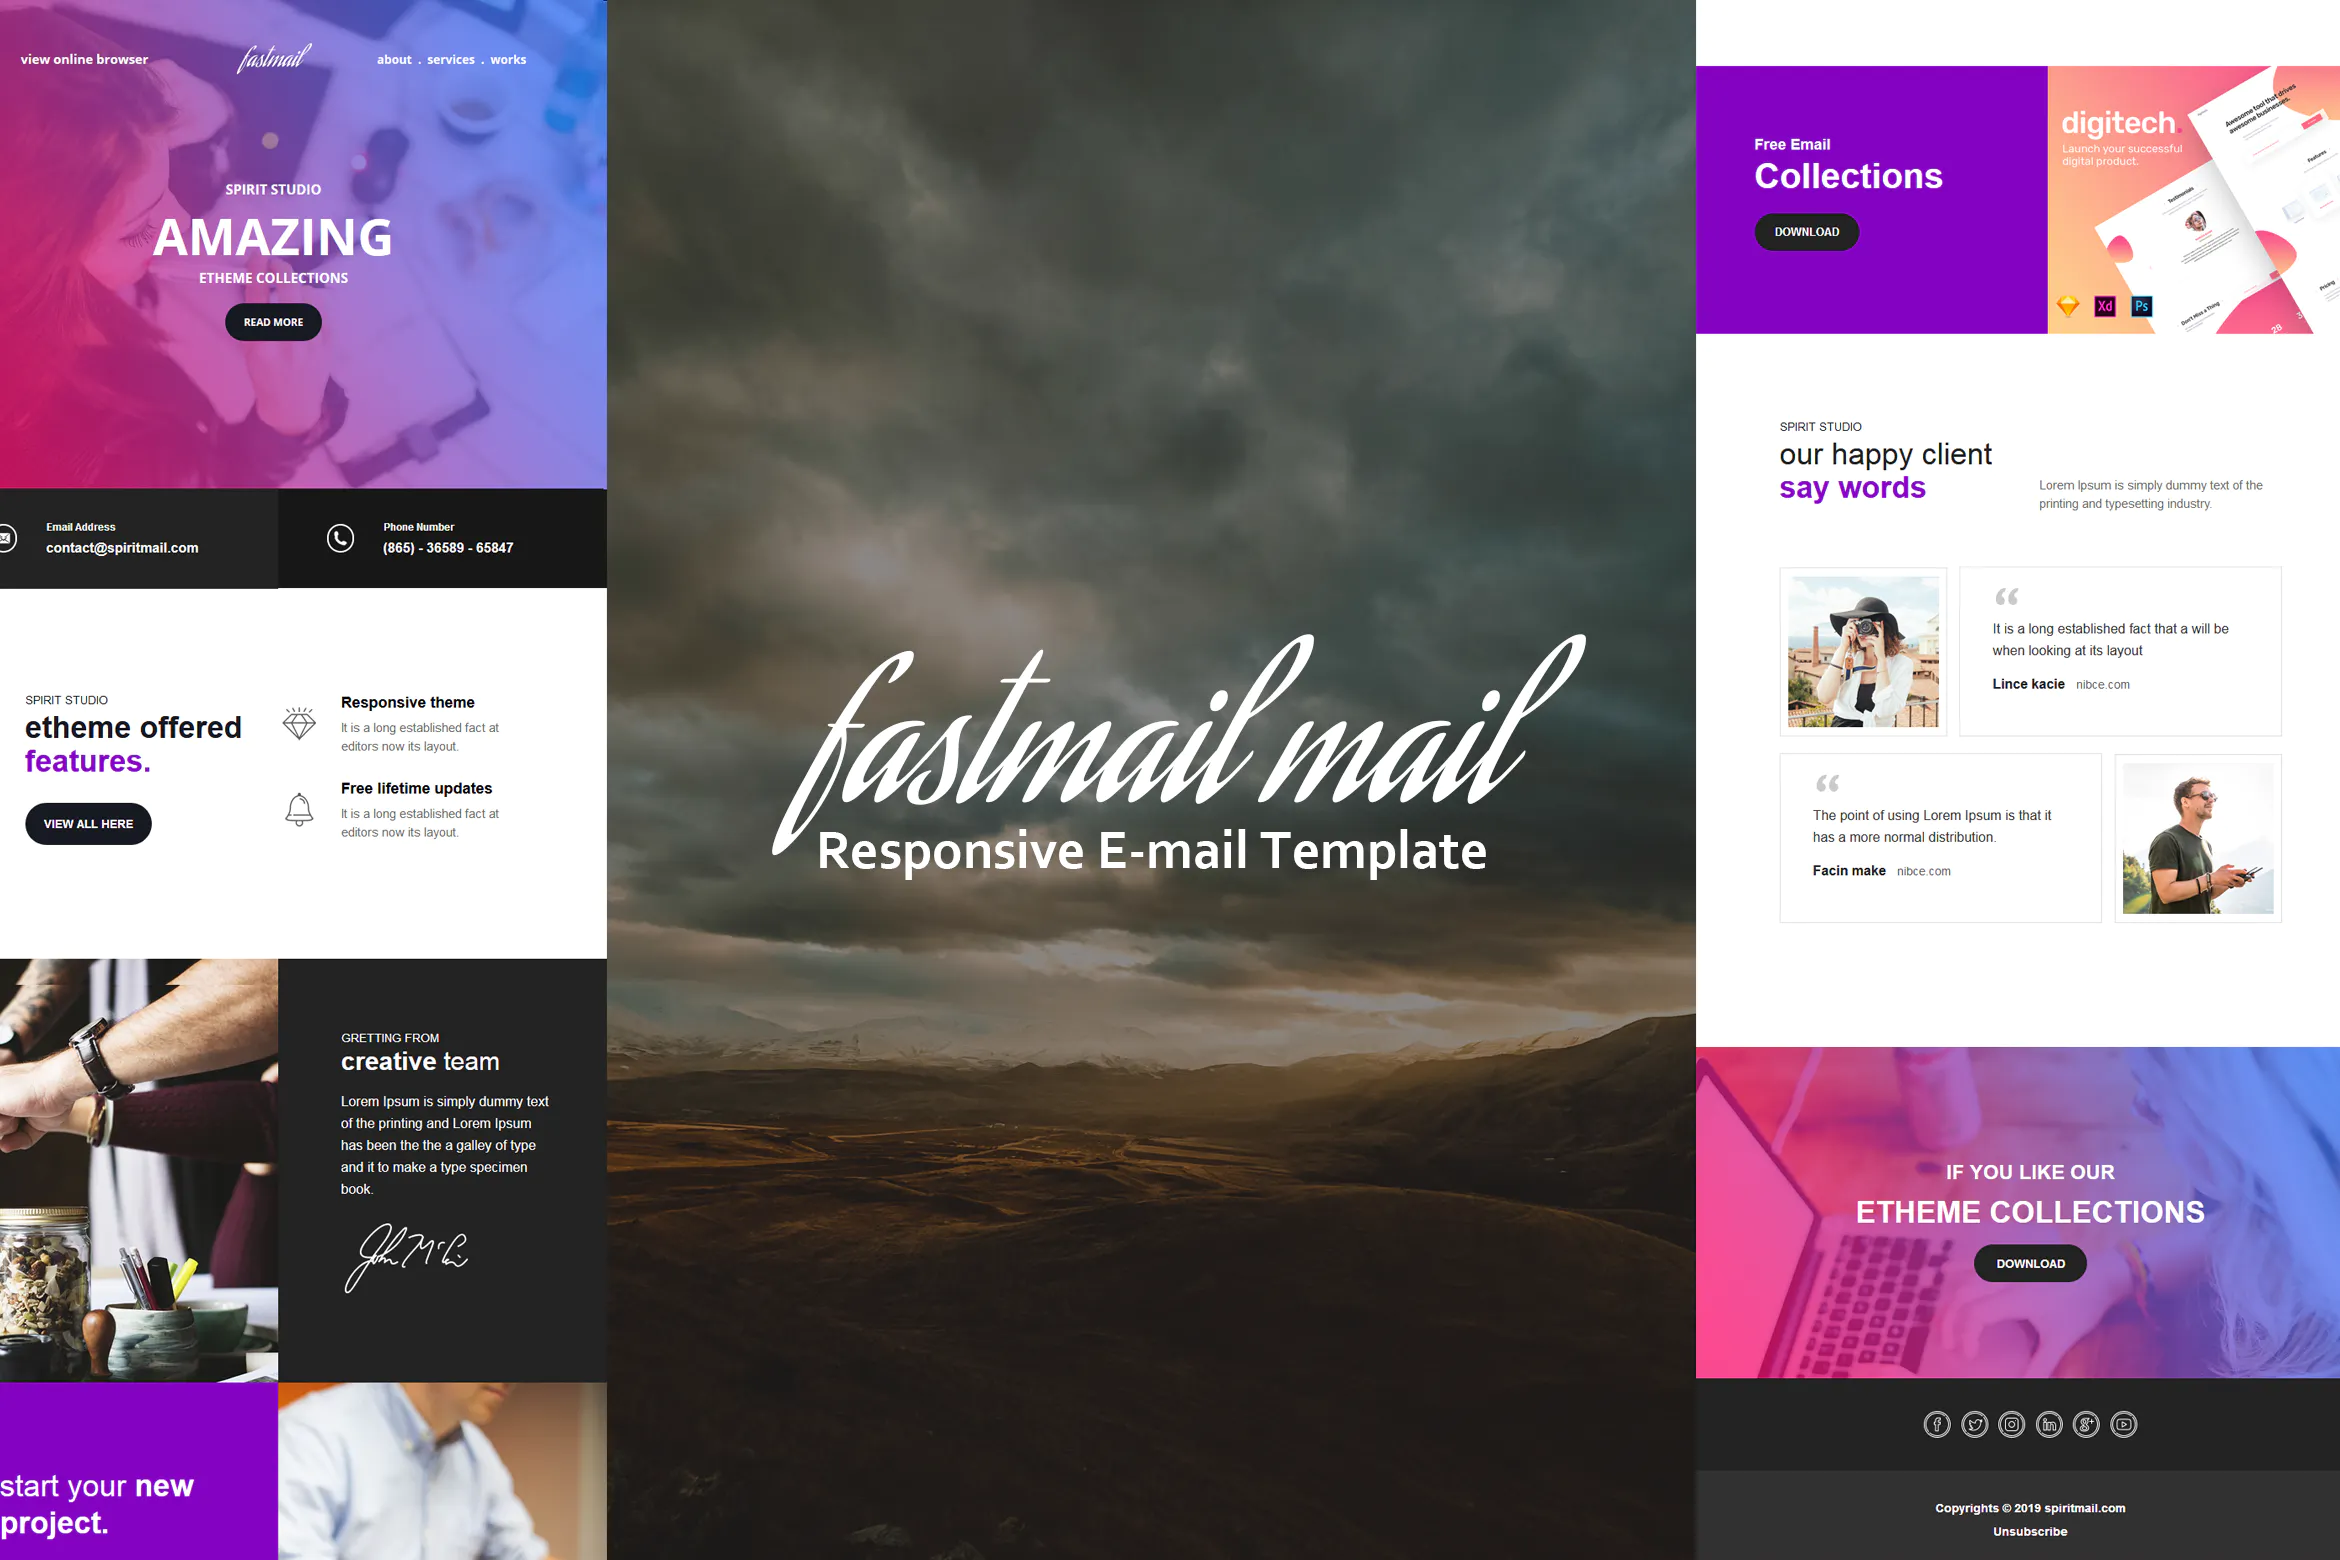 Fastmail – Responsive E-mail Template